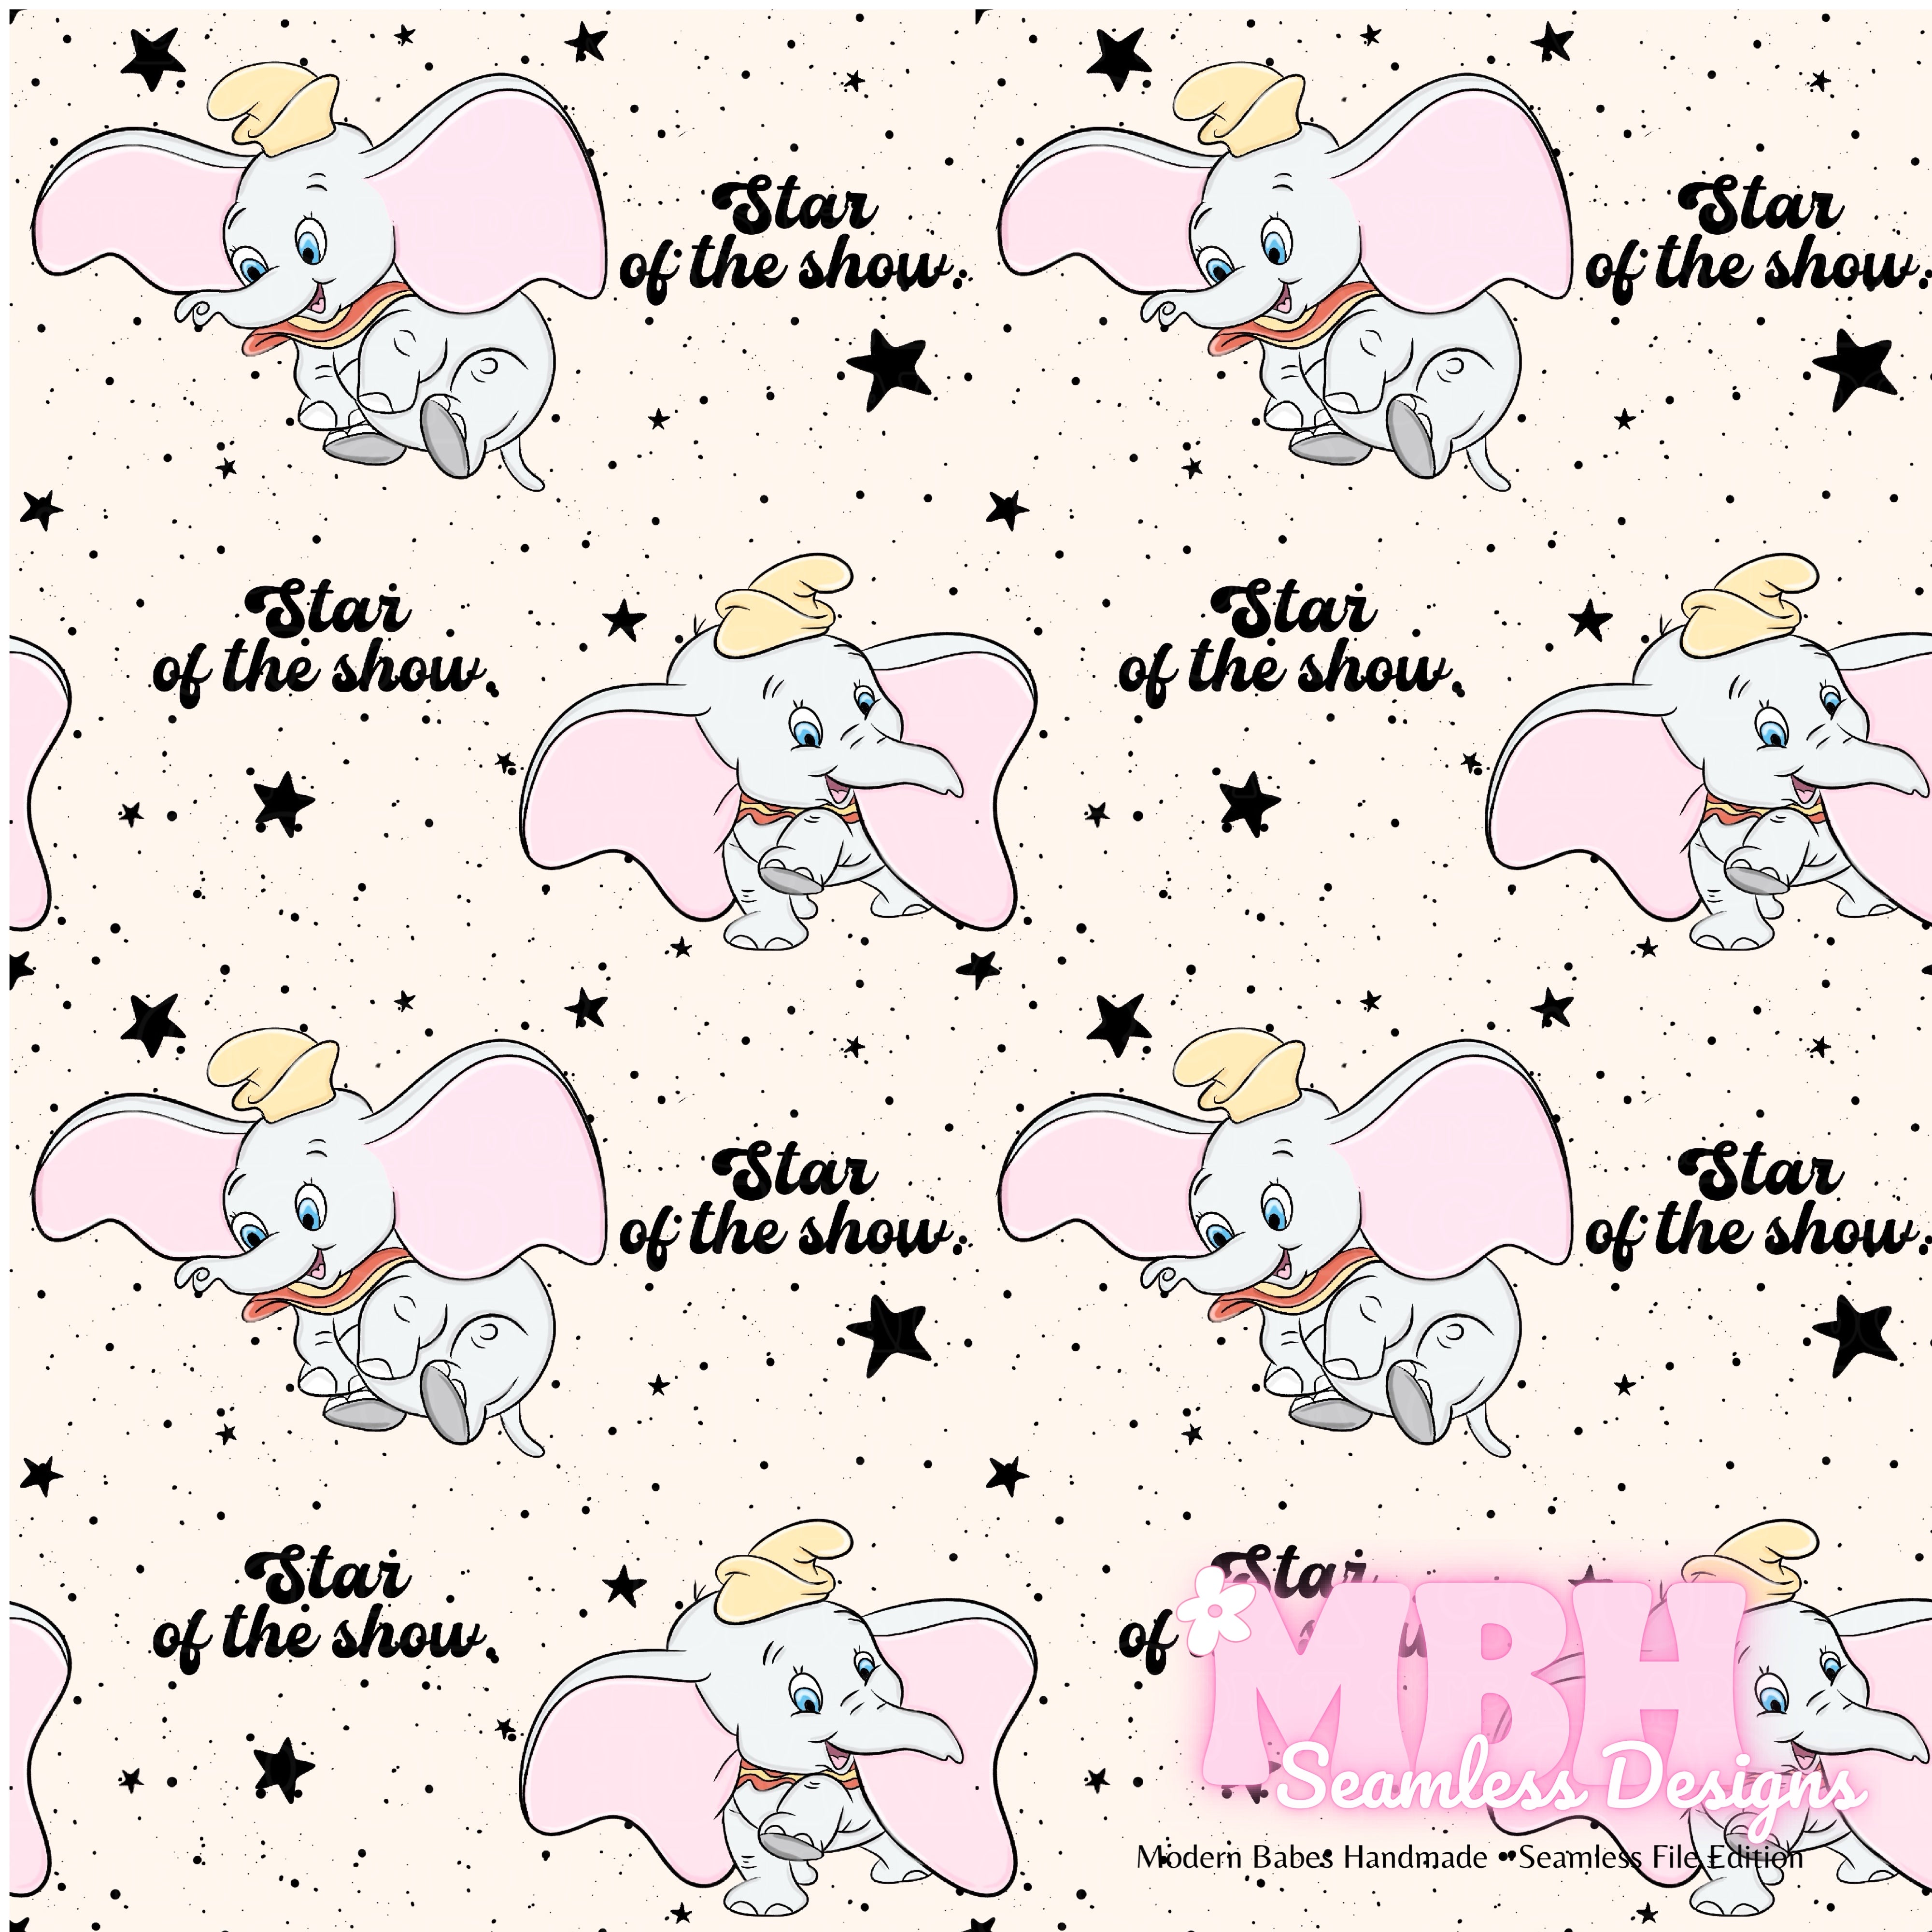 Dumbo Star ASSORTED COLORWAYS Seamless Pattern – MBH Seamless Designs